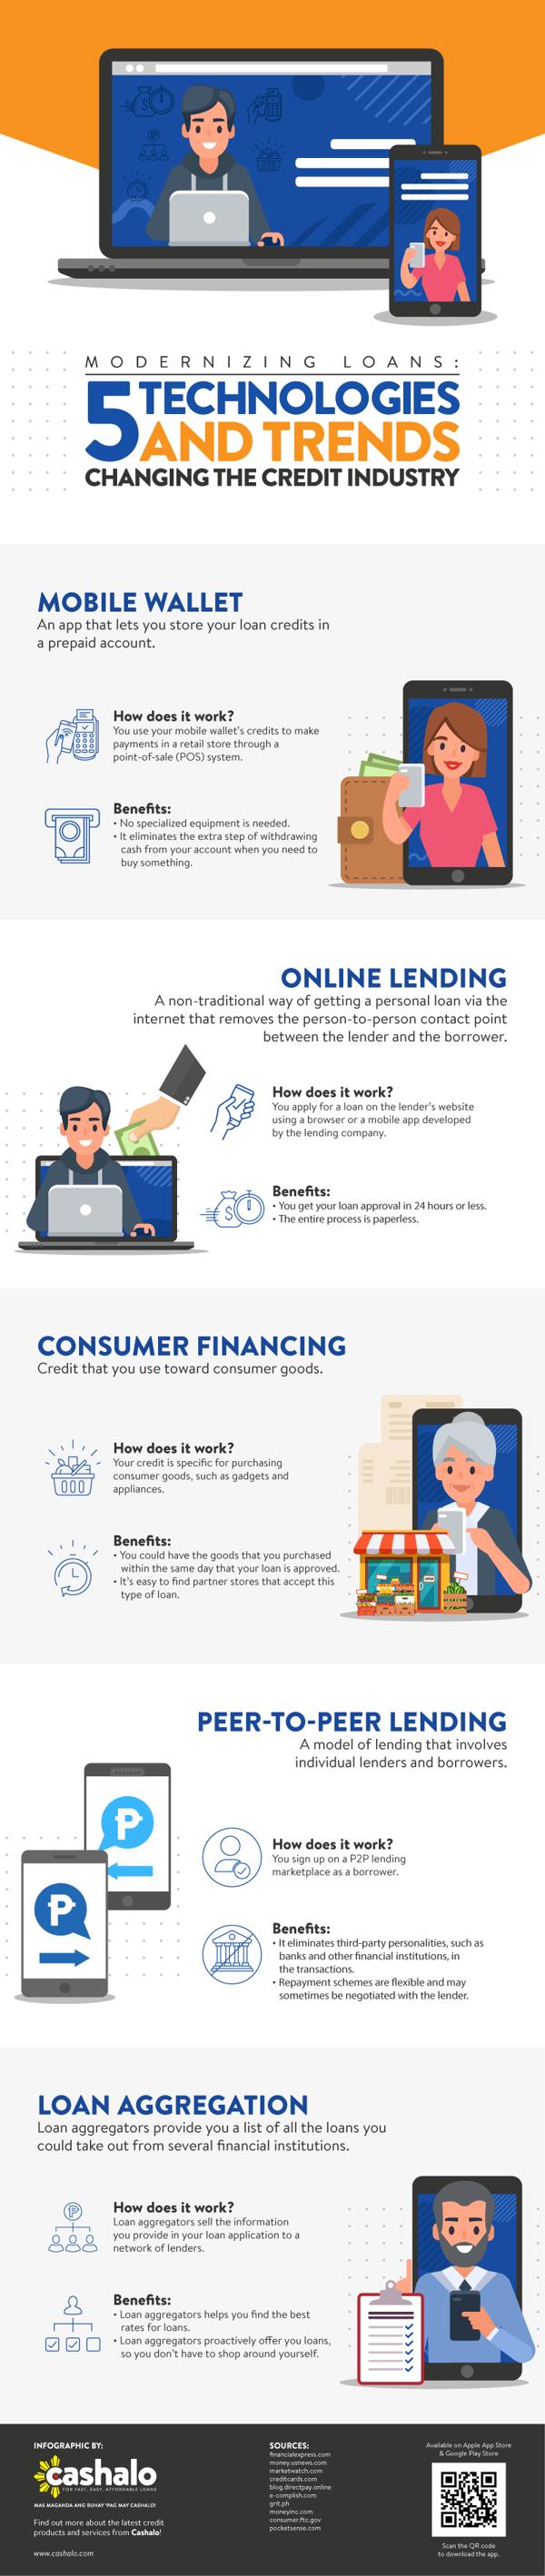 Modernizing Loans: 5 Technologies and Trends Changing the Credit Industry 1